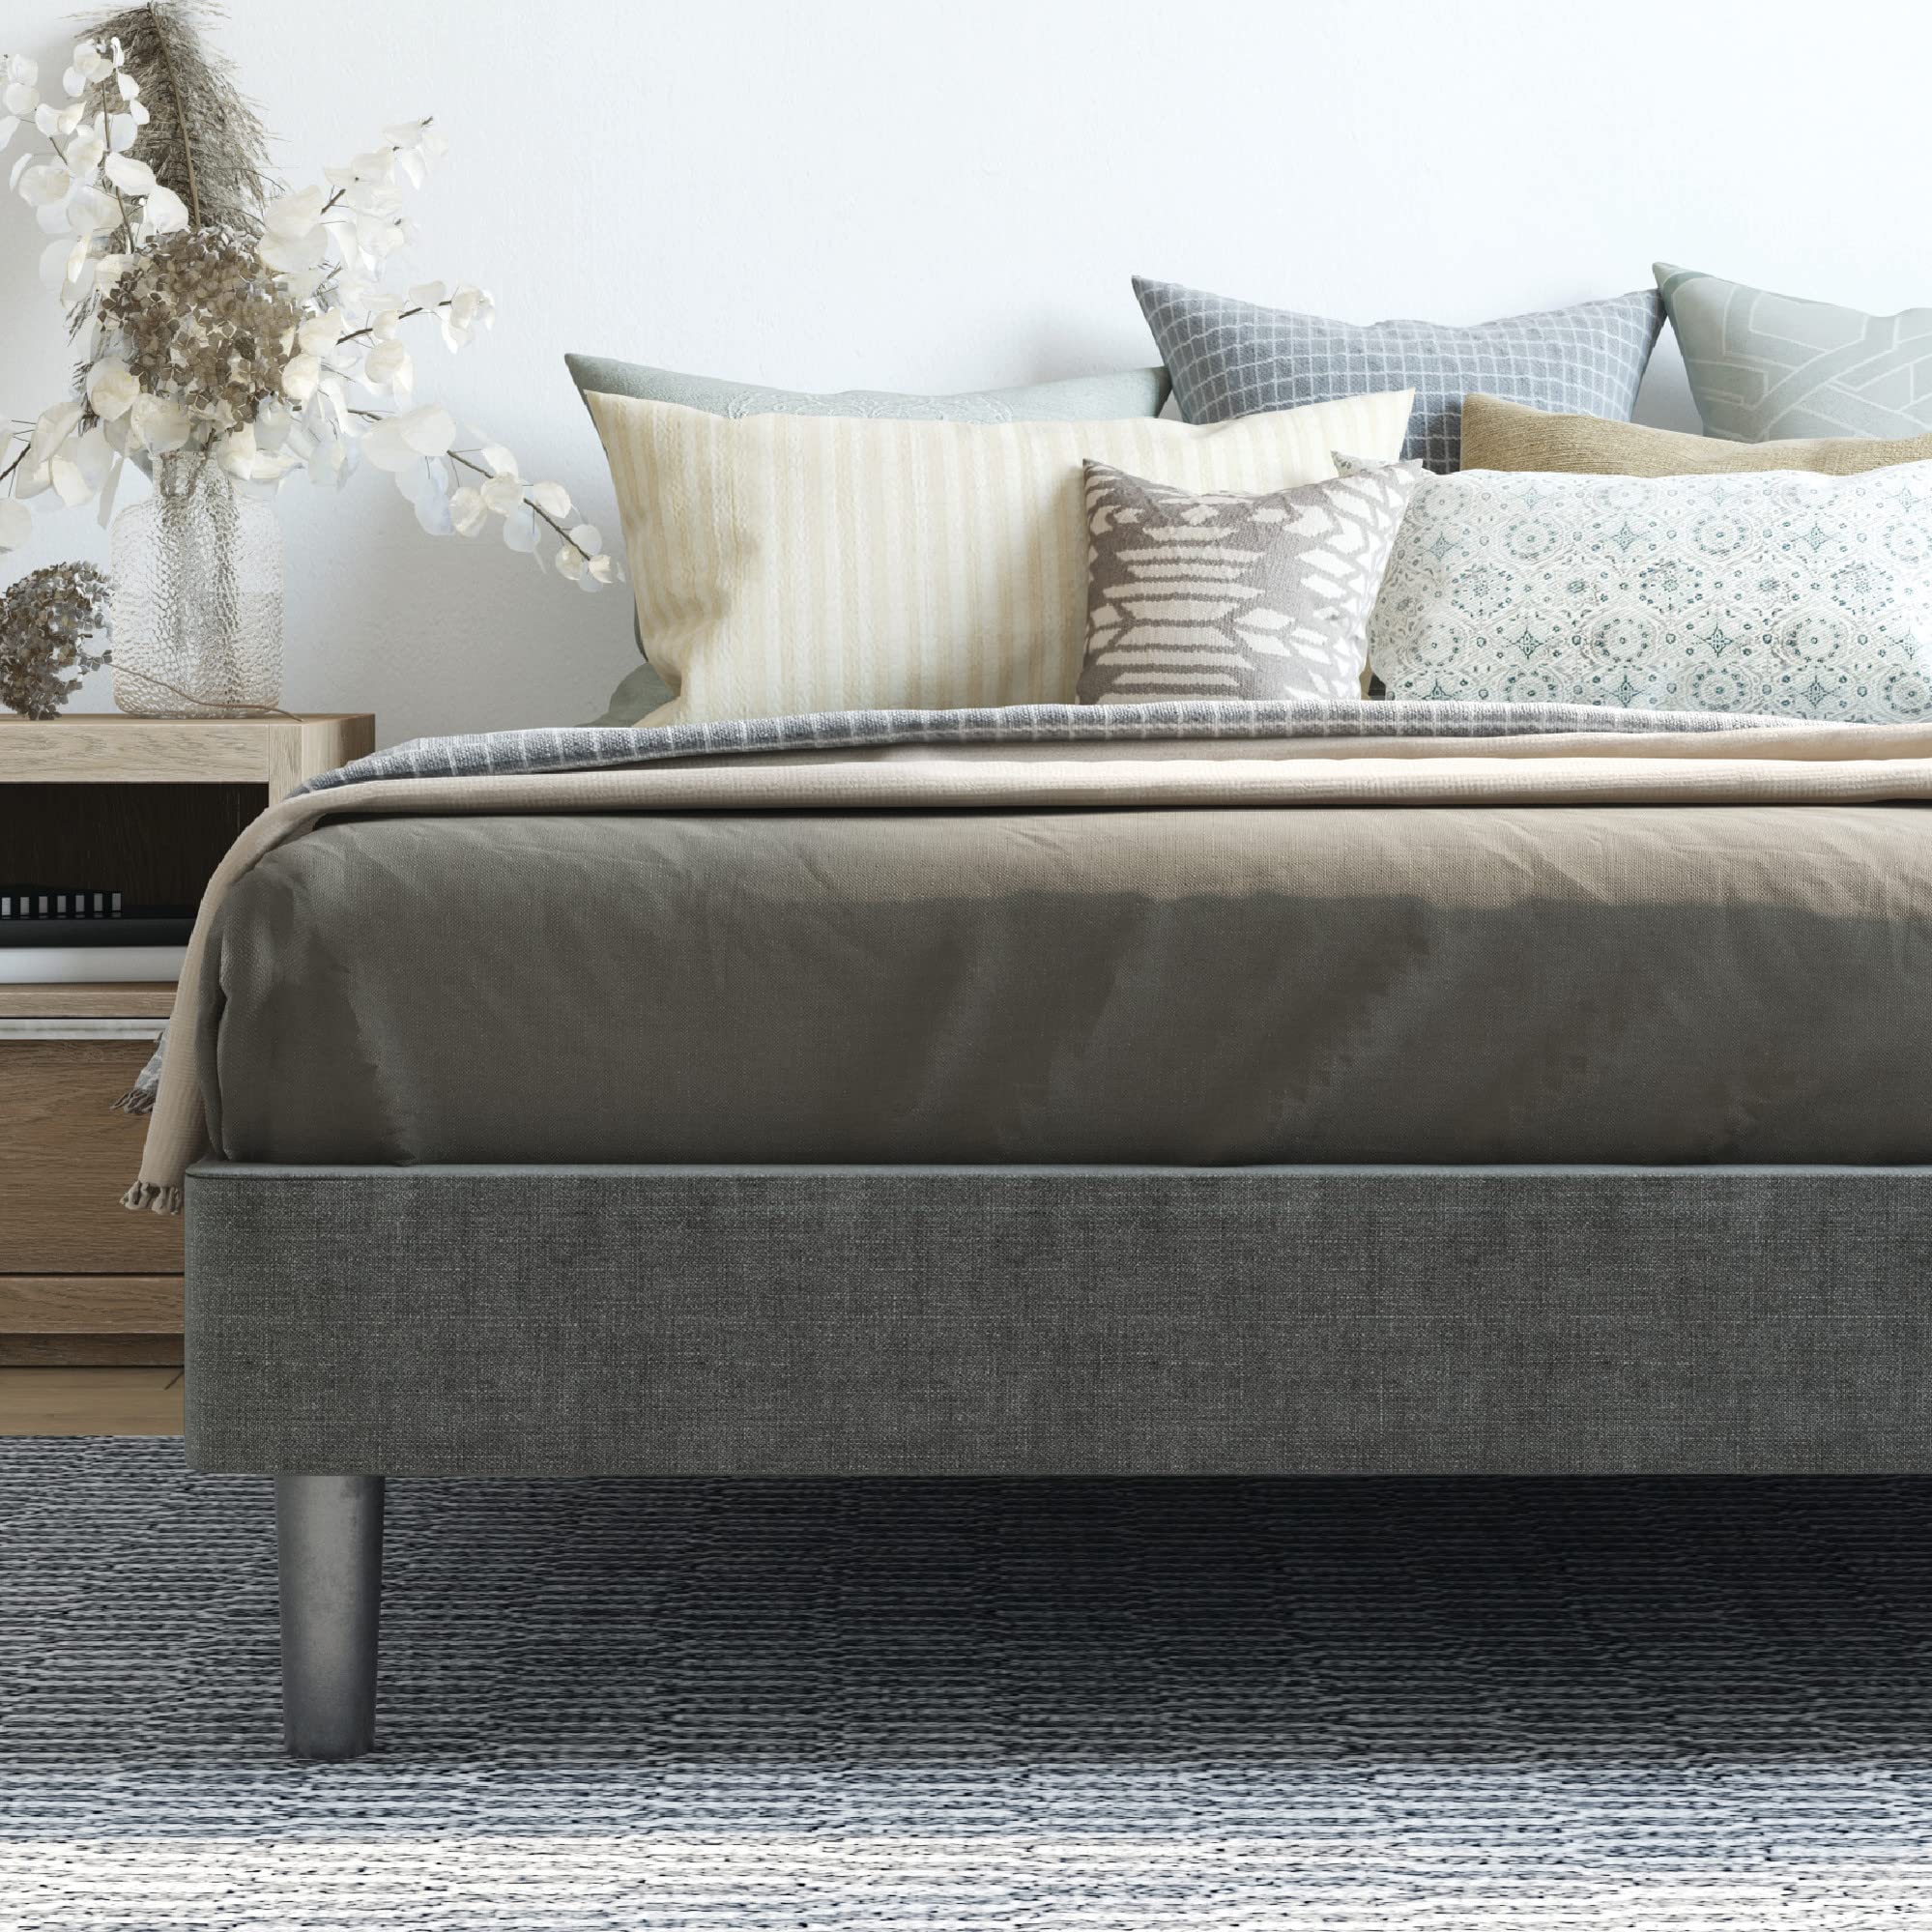 Classic Brands Claridge Upholstered Mattress Foundation or Platform Bed (Grey, Full) $58.65 + Free Shipping